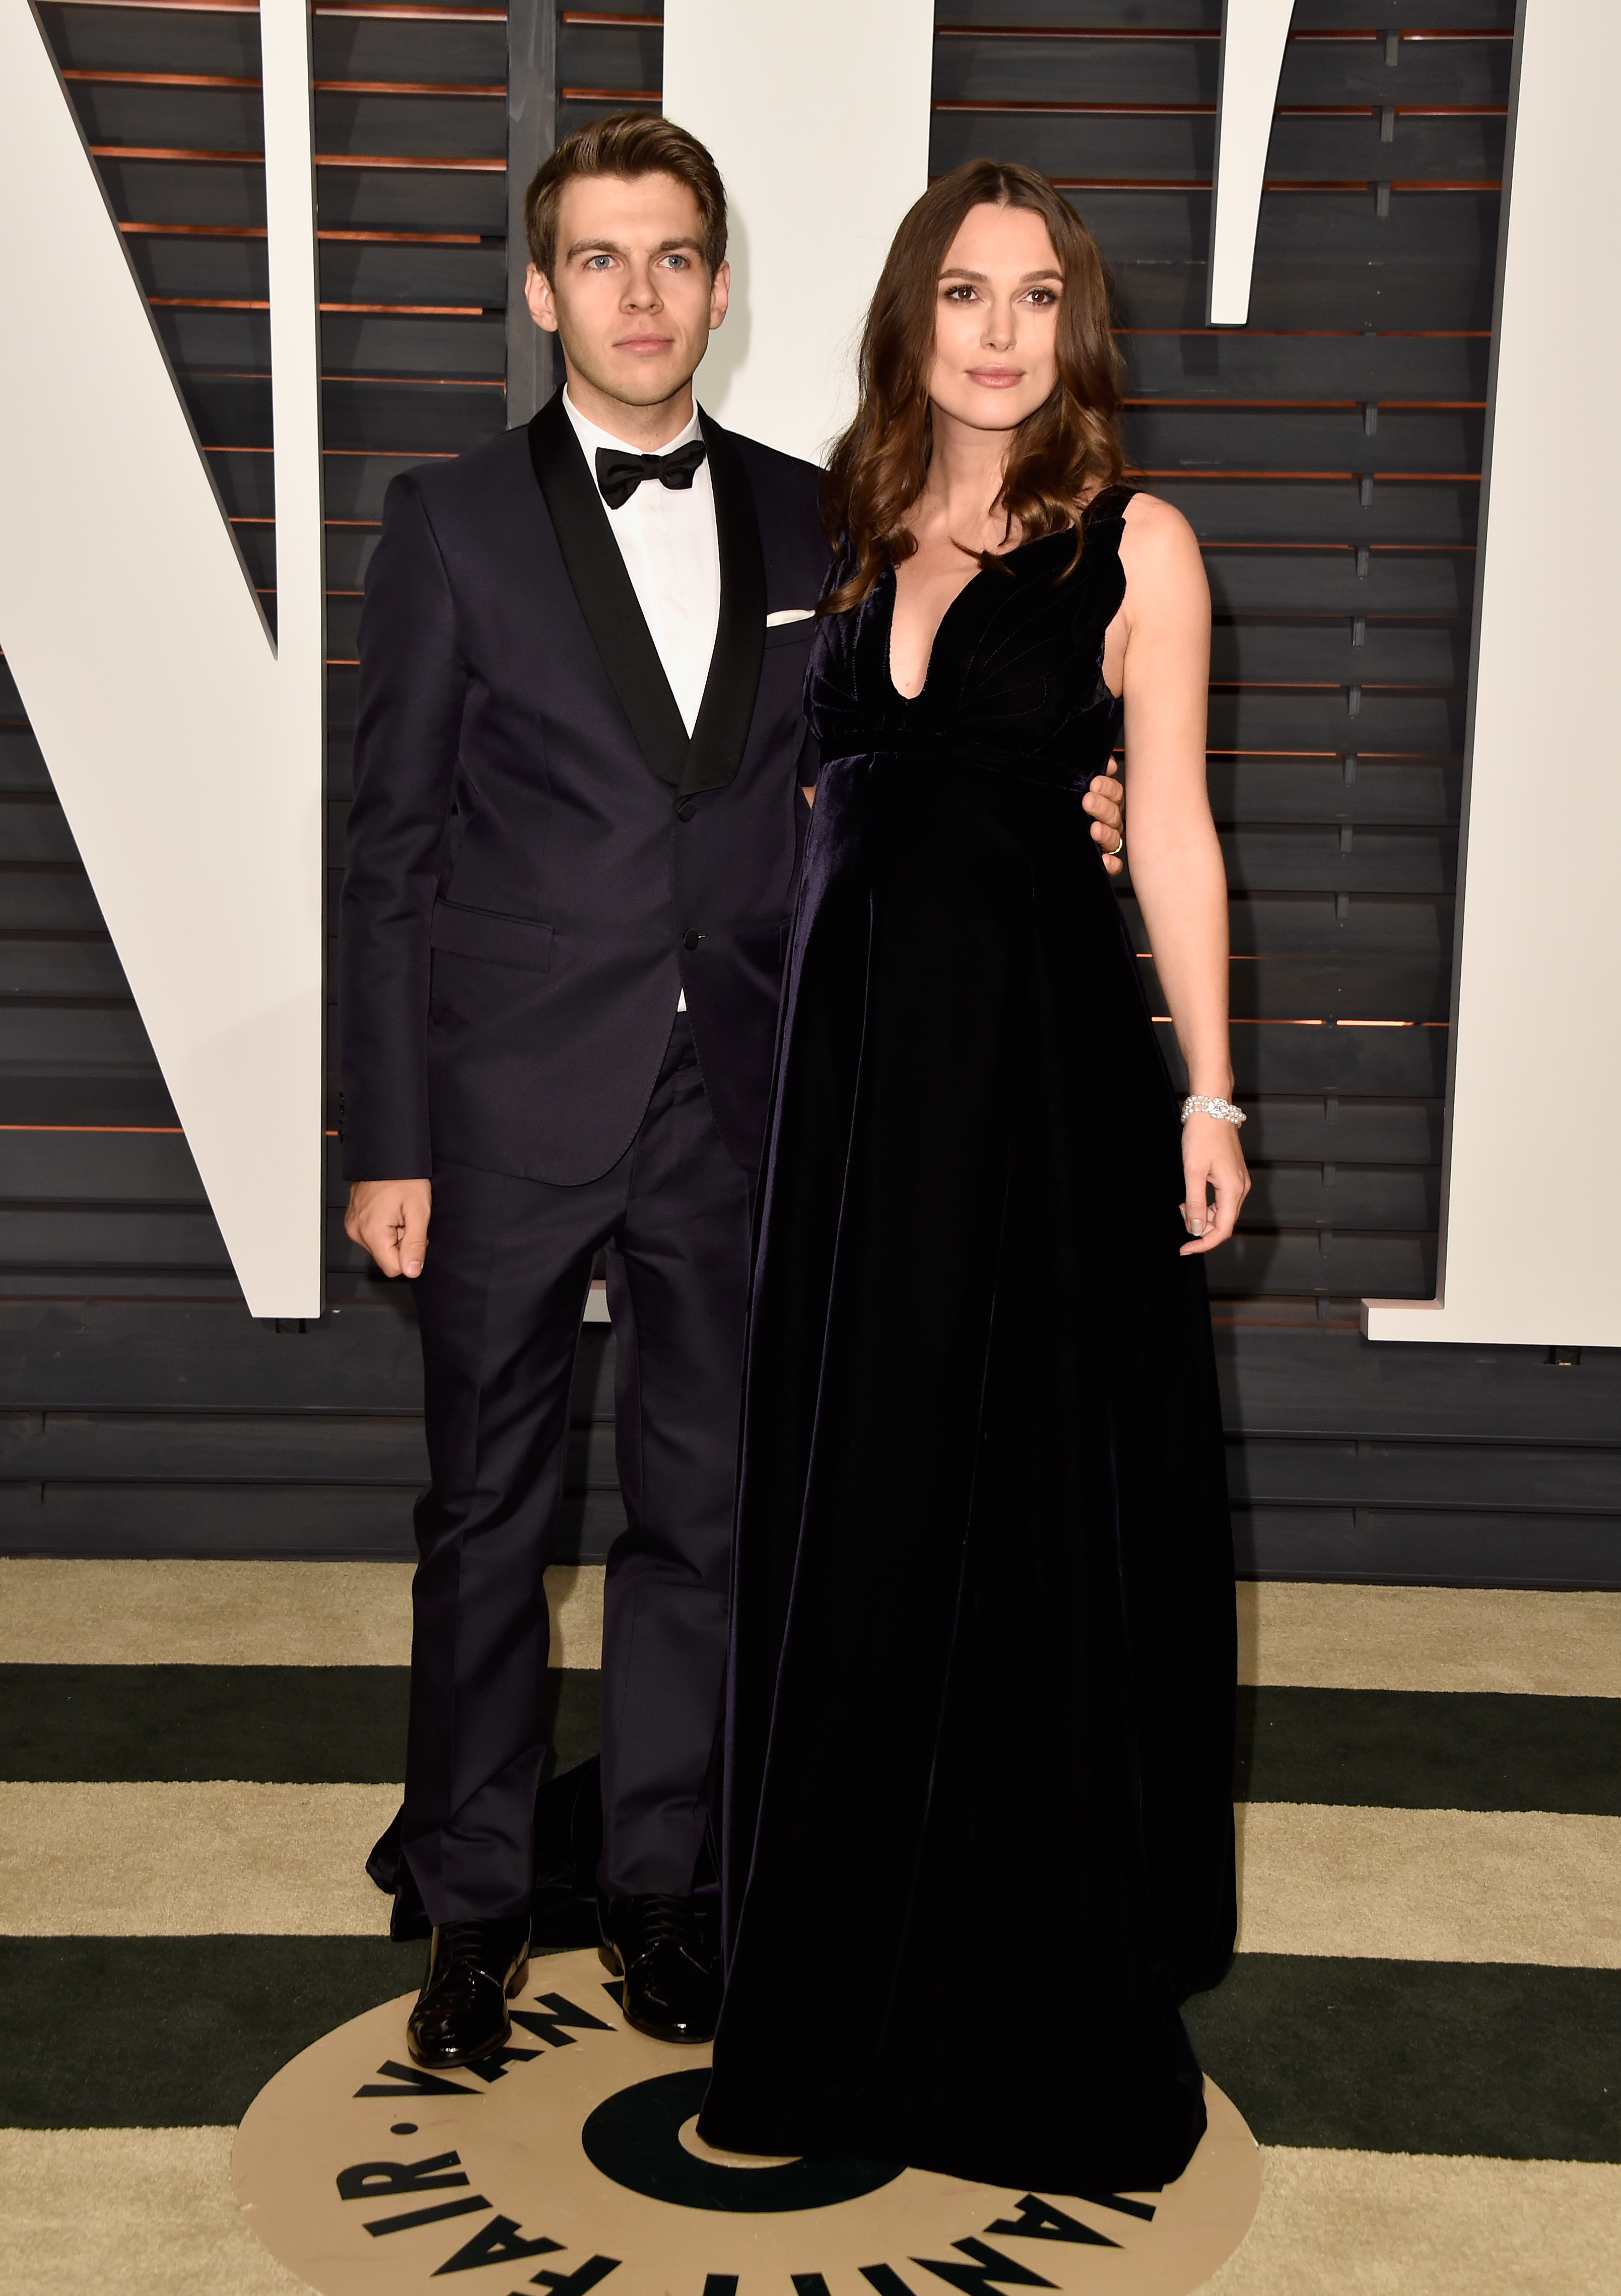 BEVERLY HILLS, CA - FEBRUARY 22: Musician James Righton and actress Keira Knightley attend the 2015 Vanity Fair Oscar Party hosted by Graydon Carter at Wallis Annenberg Center for the Performing Arts on February 22, 2015 in Beverly Hills, California. (Photo by Pascal Le Segretain/Getty Images)